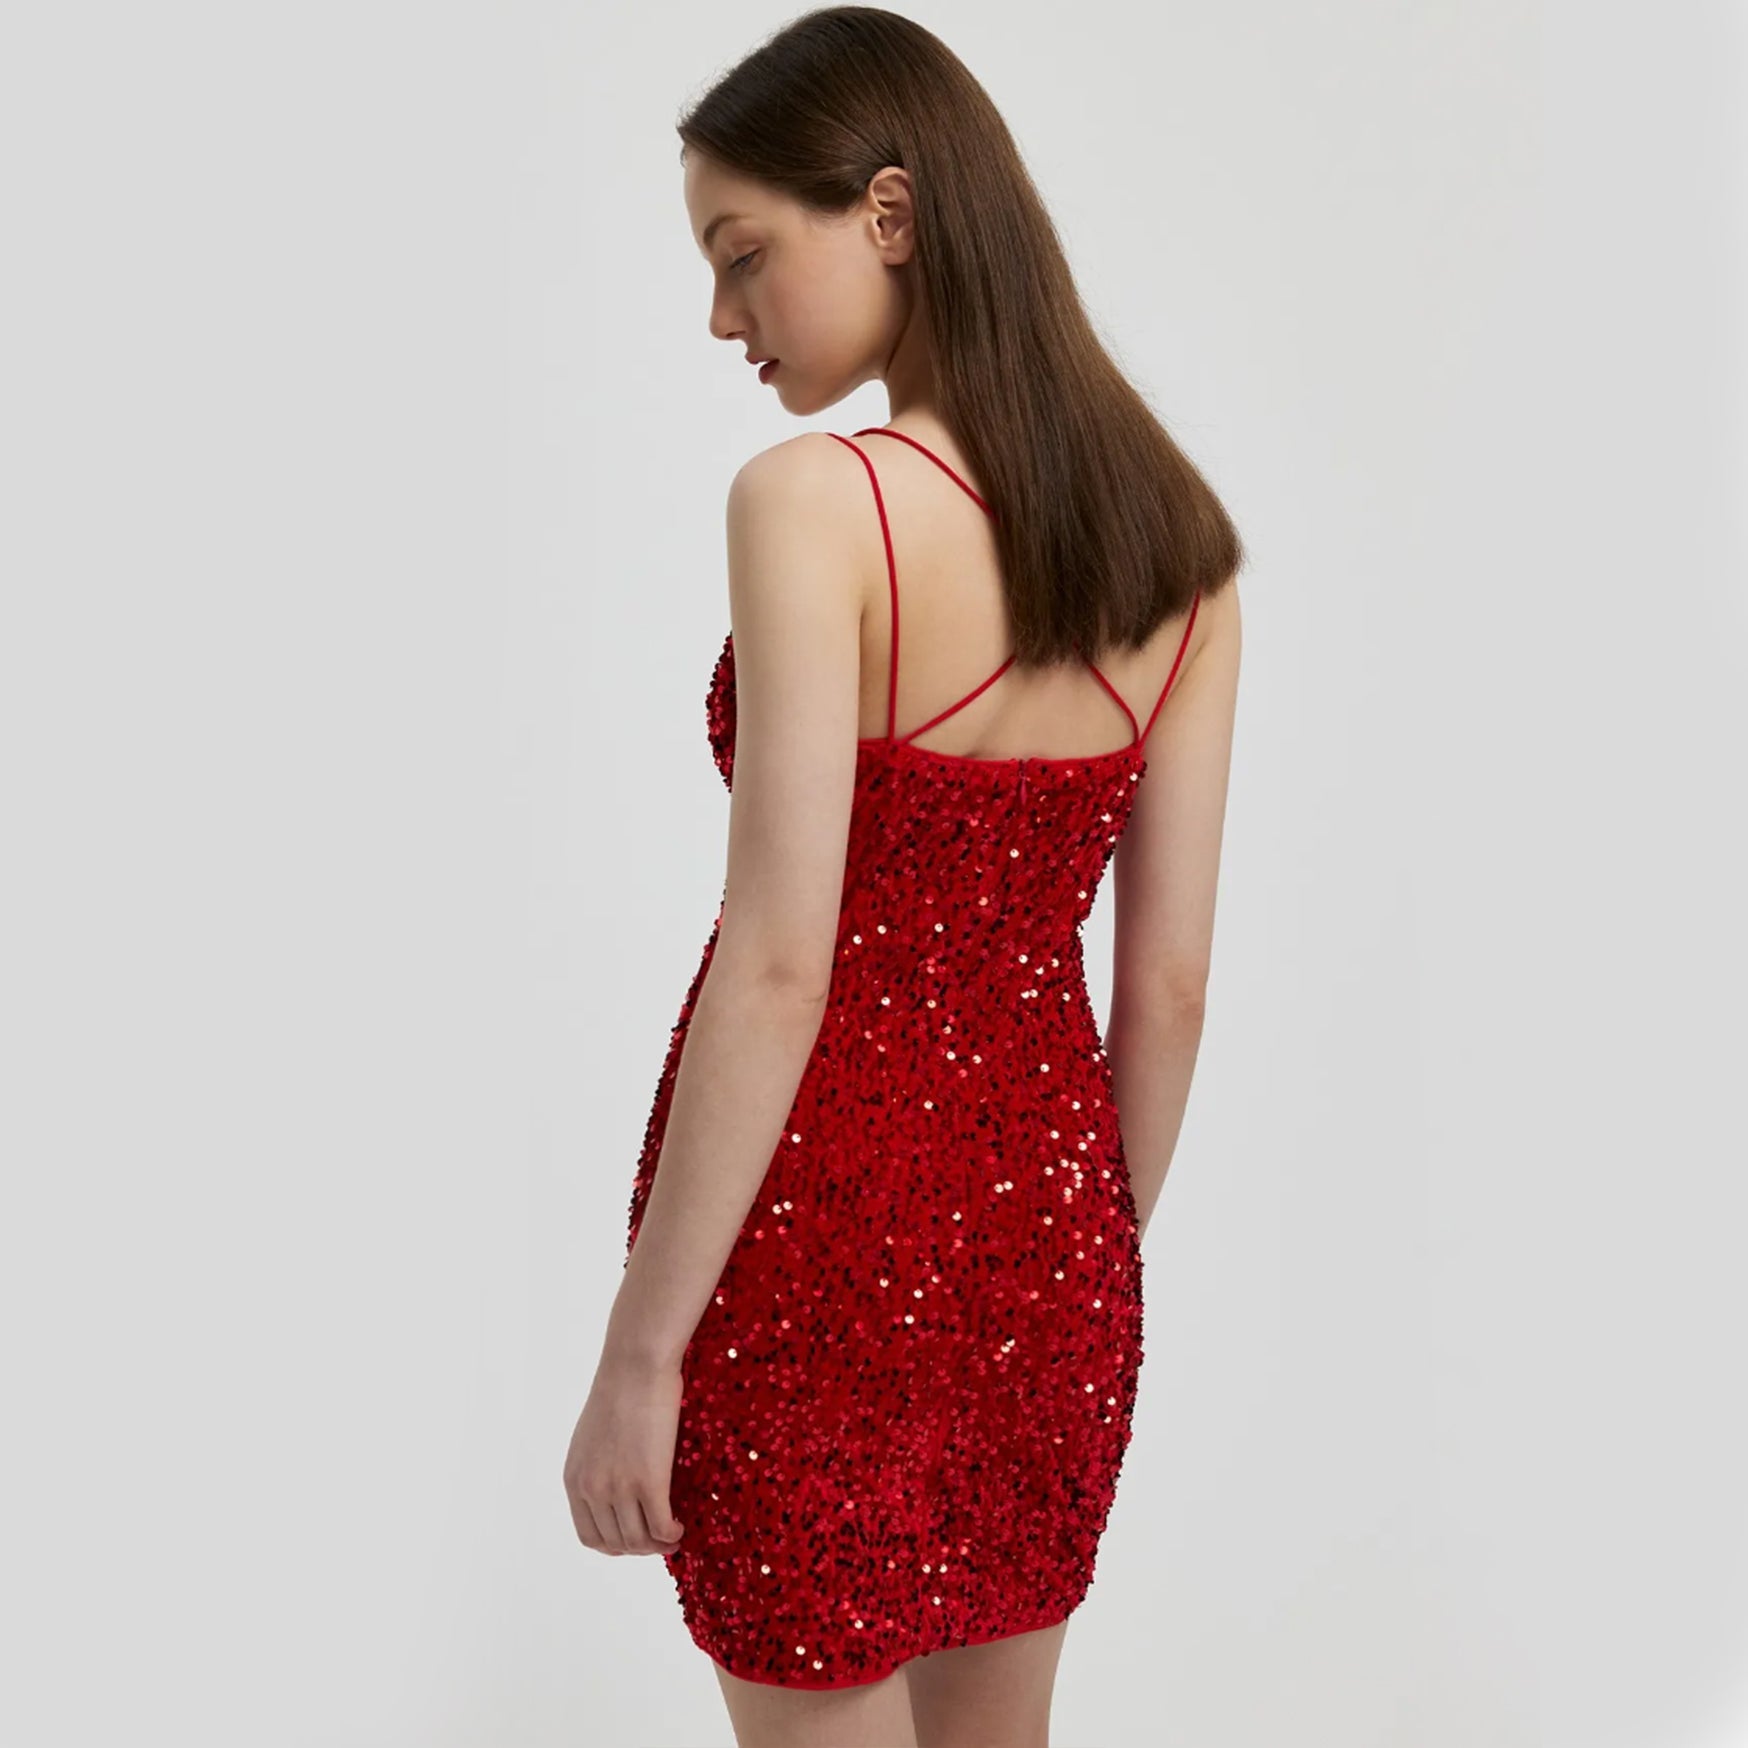 Backless Cocktail Dress - Red S